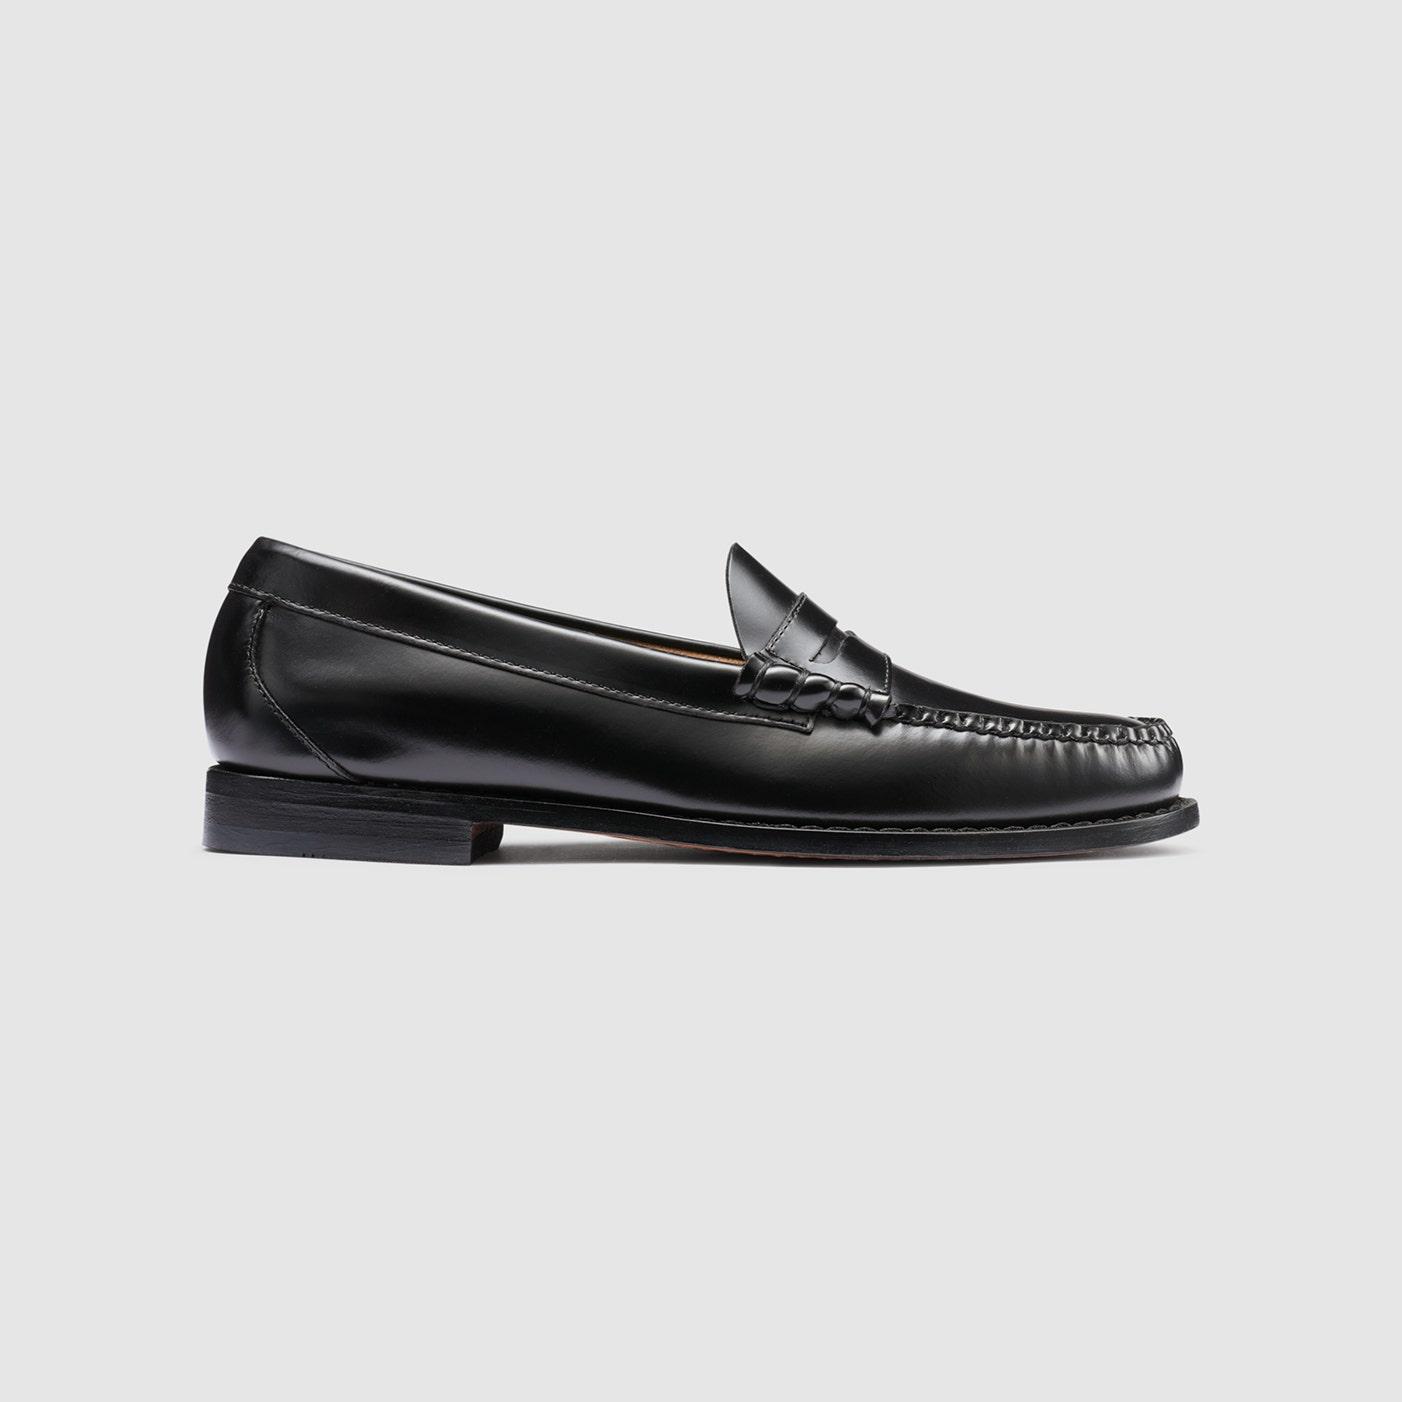 G.H.BASS Original G.H.BASS   Men's Larson Weejuns Loafer Shoes   Black   Size 12W  - Size: 12W Product Image